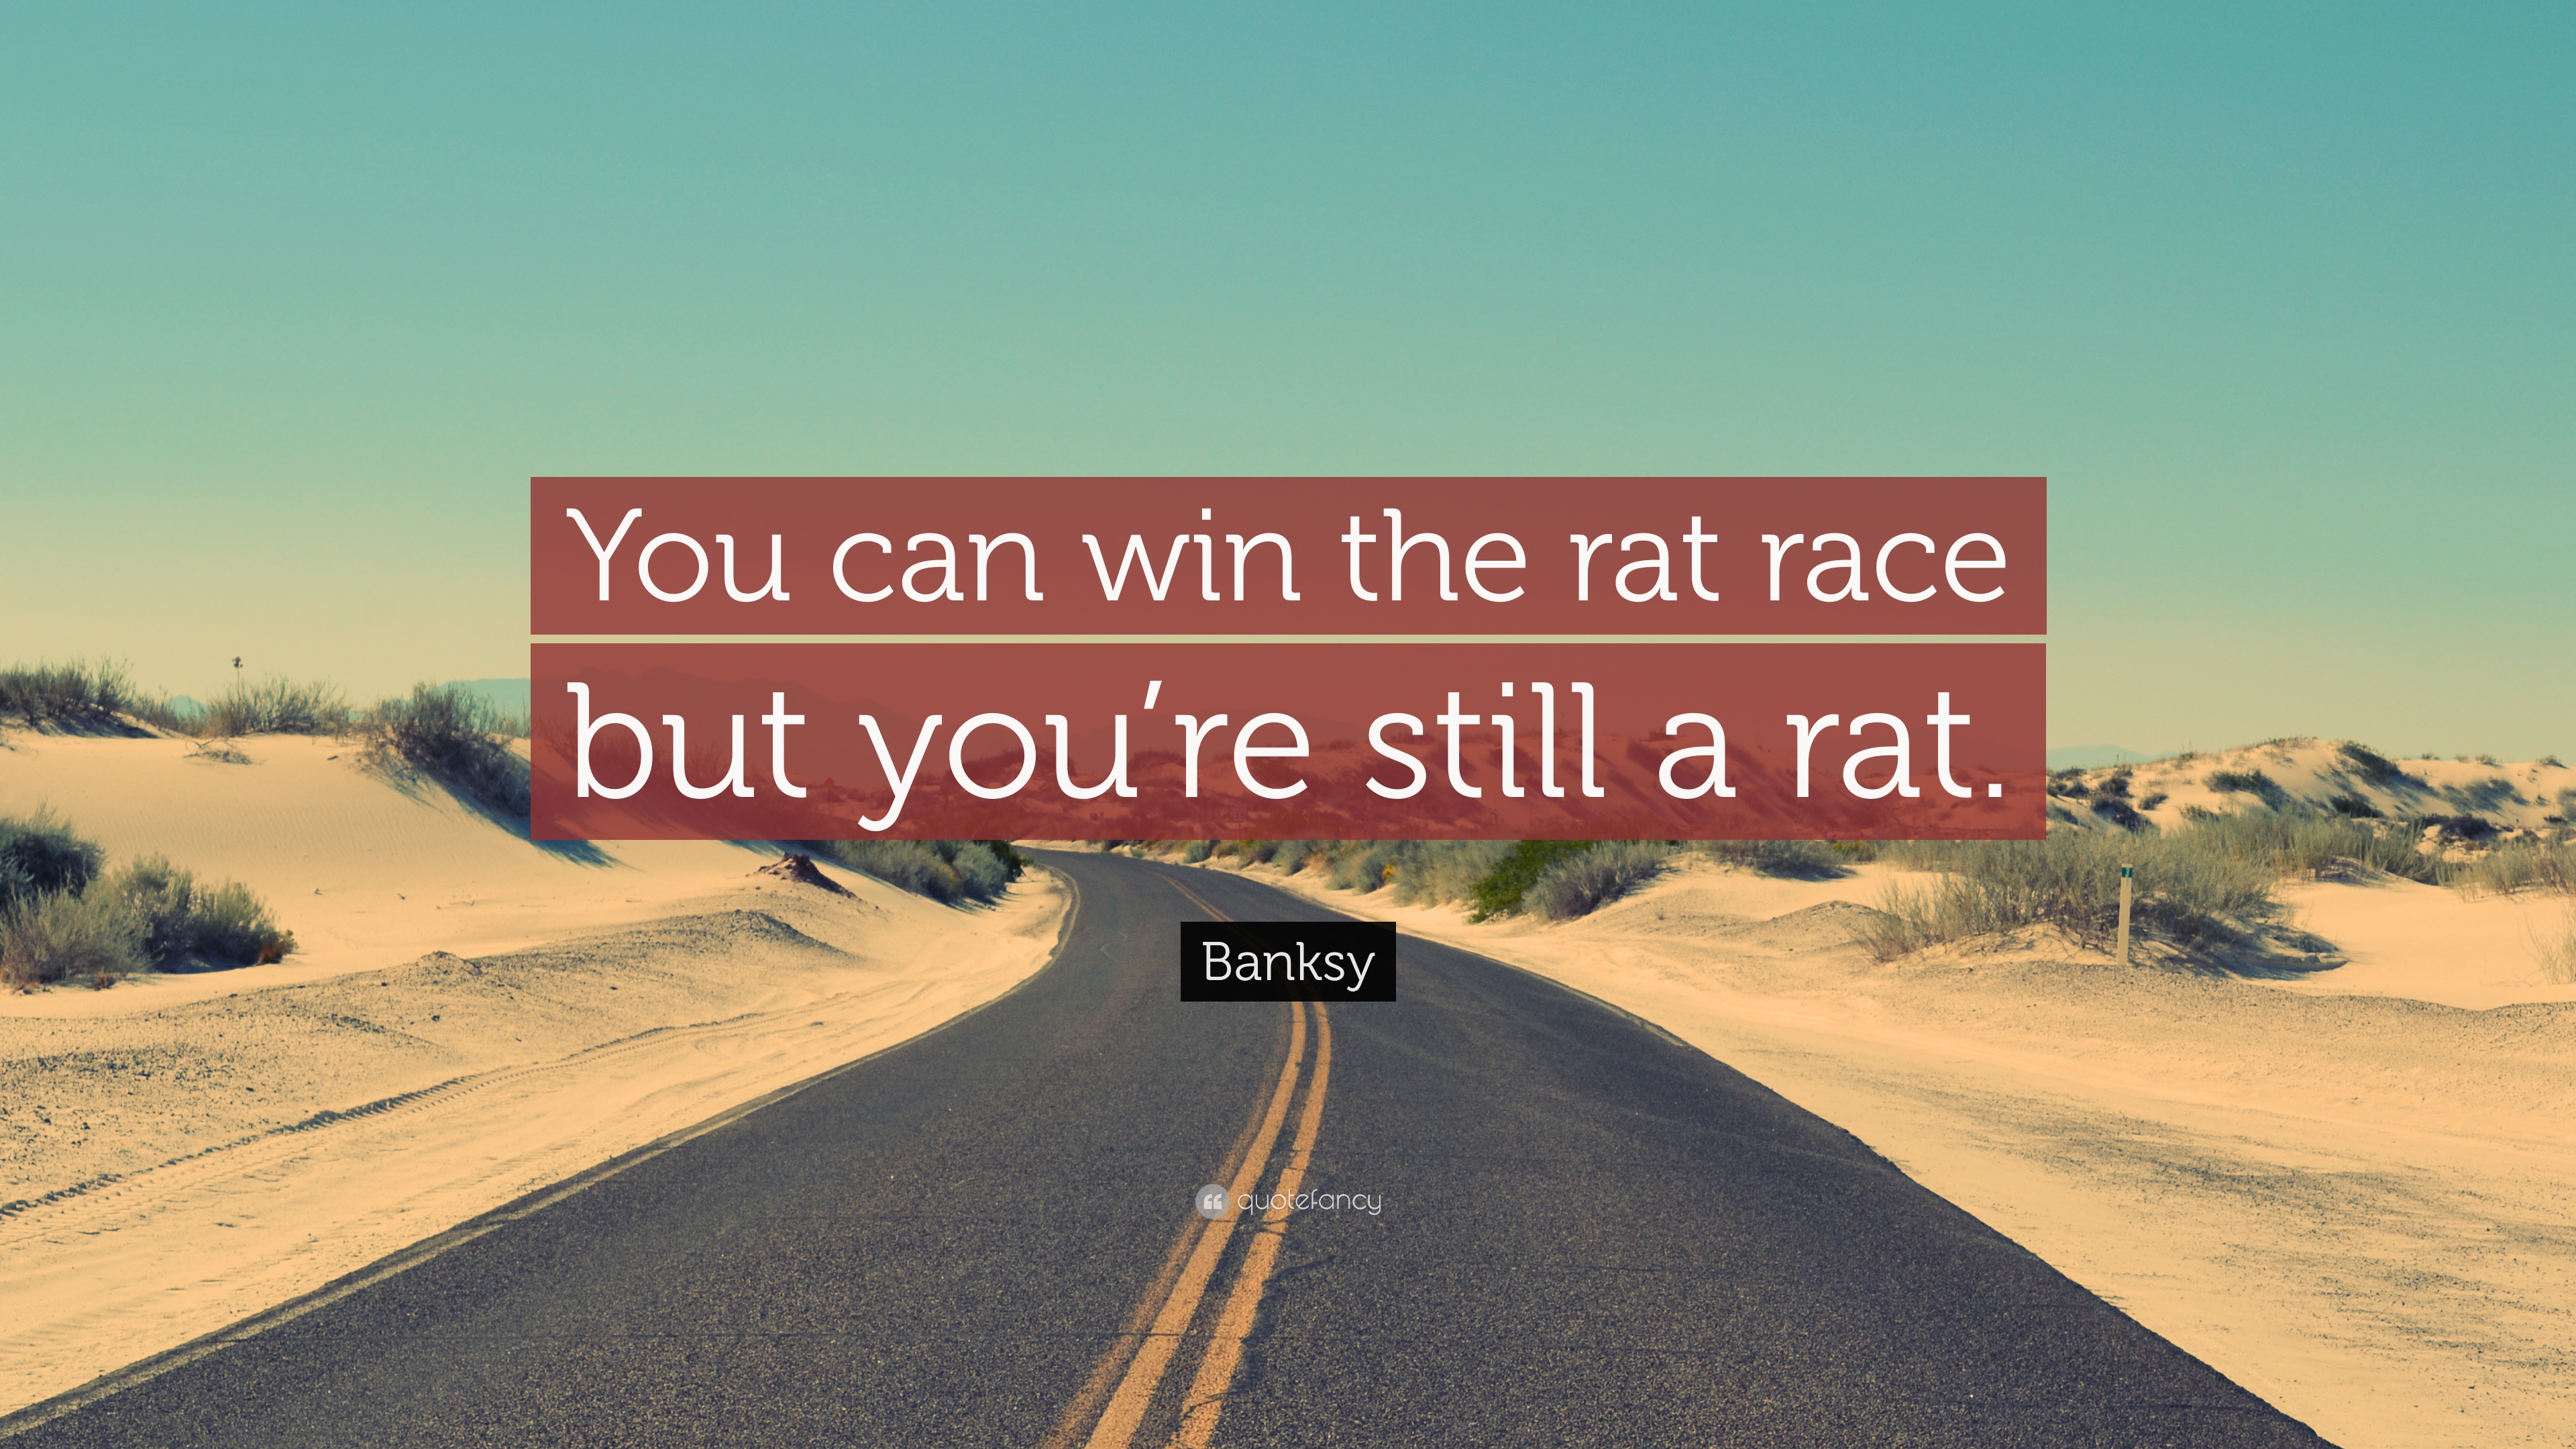 Banksy Quote: “You can win the rat race but you're still a rat.”